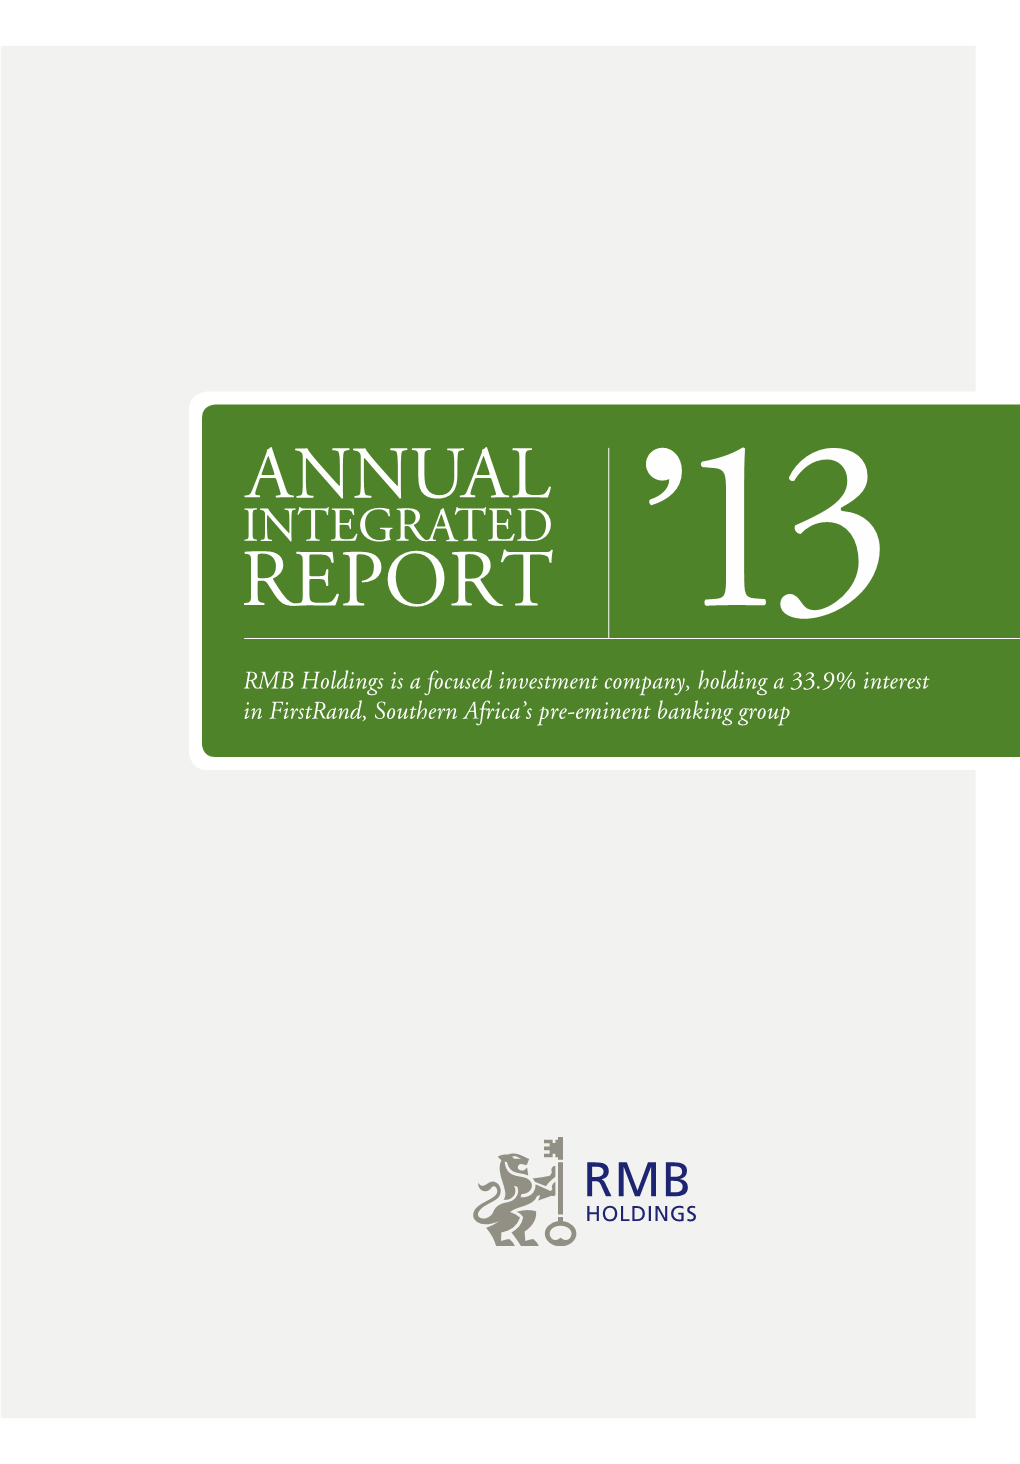 Annual Integrated Report 2013, of Which This Notice Forms a Part (Annual Integrated Report)